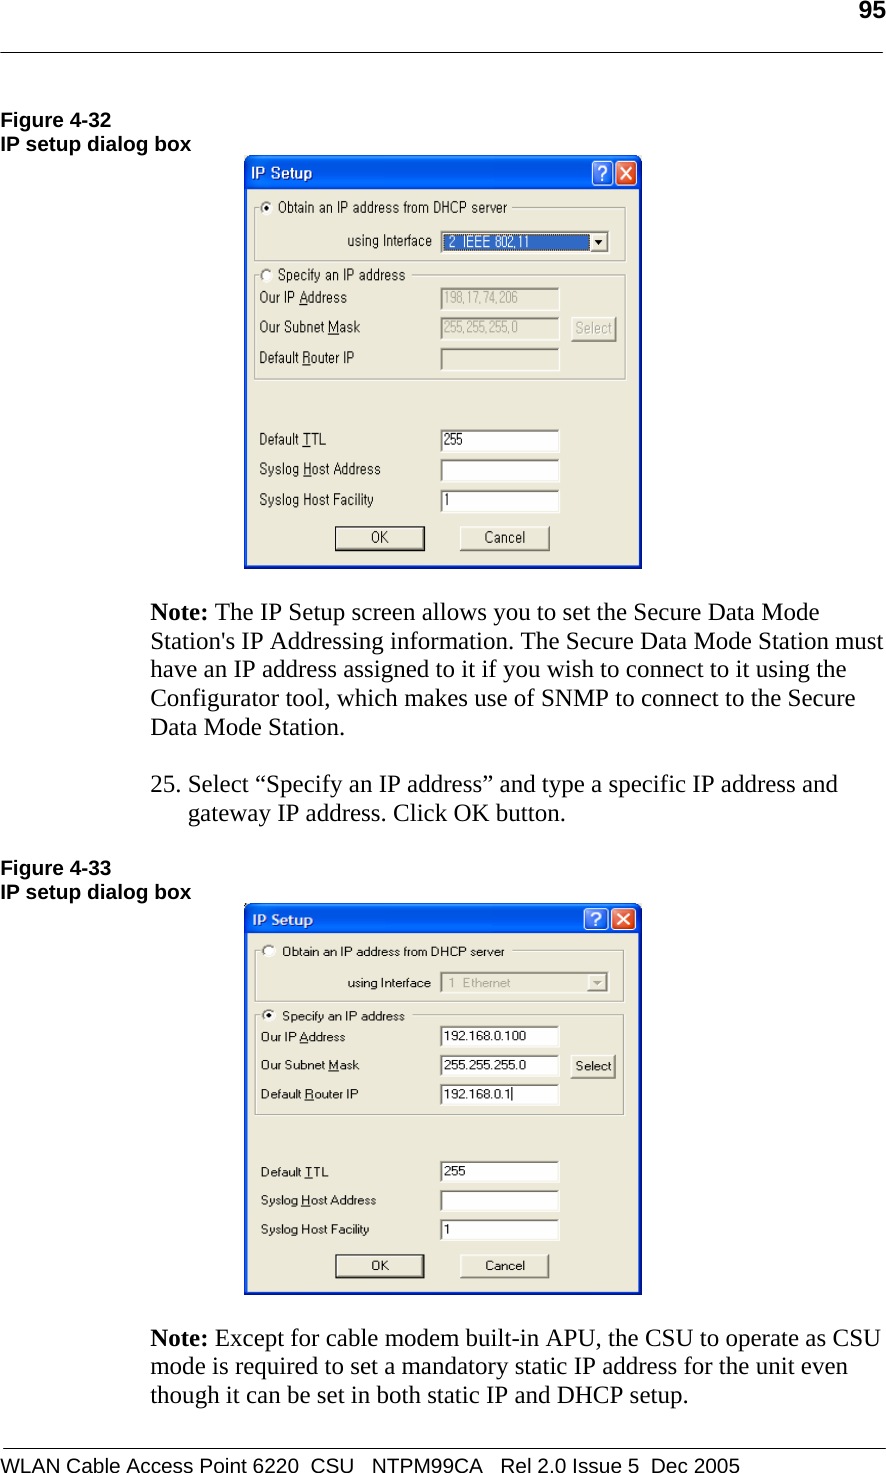   95  WLAN Cable Access Point 6220  CSU   NTPM99CA   Rel 2.0 Issue 5  Dec 2005 Figure 4-32 IP setup dialog box   Note: The IP Setup screen allows you to set the Secure Data Mode Station&apos;s IP Addressing information. The Secure Data Mode Station must have an IP address assigned to it if you wish to connect to it using the Configurator tool, which makes use of SNMP to connect to the Secure Data Mode Station.  25. Select “Specify an IP address” and type a specific IP address and gateway IP address. Click OK button.   Figure 4-33 IP setup dialog box   Note: Except for cable modem built-in APU, the CSU to operate as CSU mode is required to set a mandatory static IP address for the unit even though it can be set in both static IP and DHCP setup.  